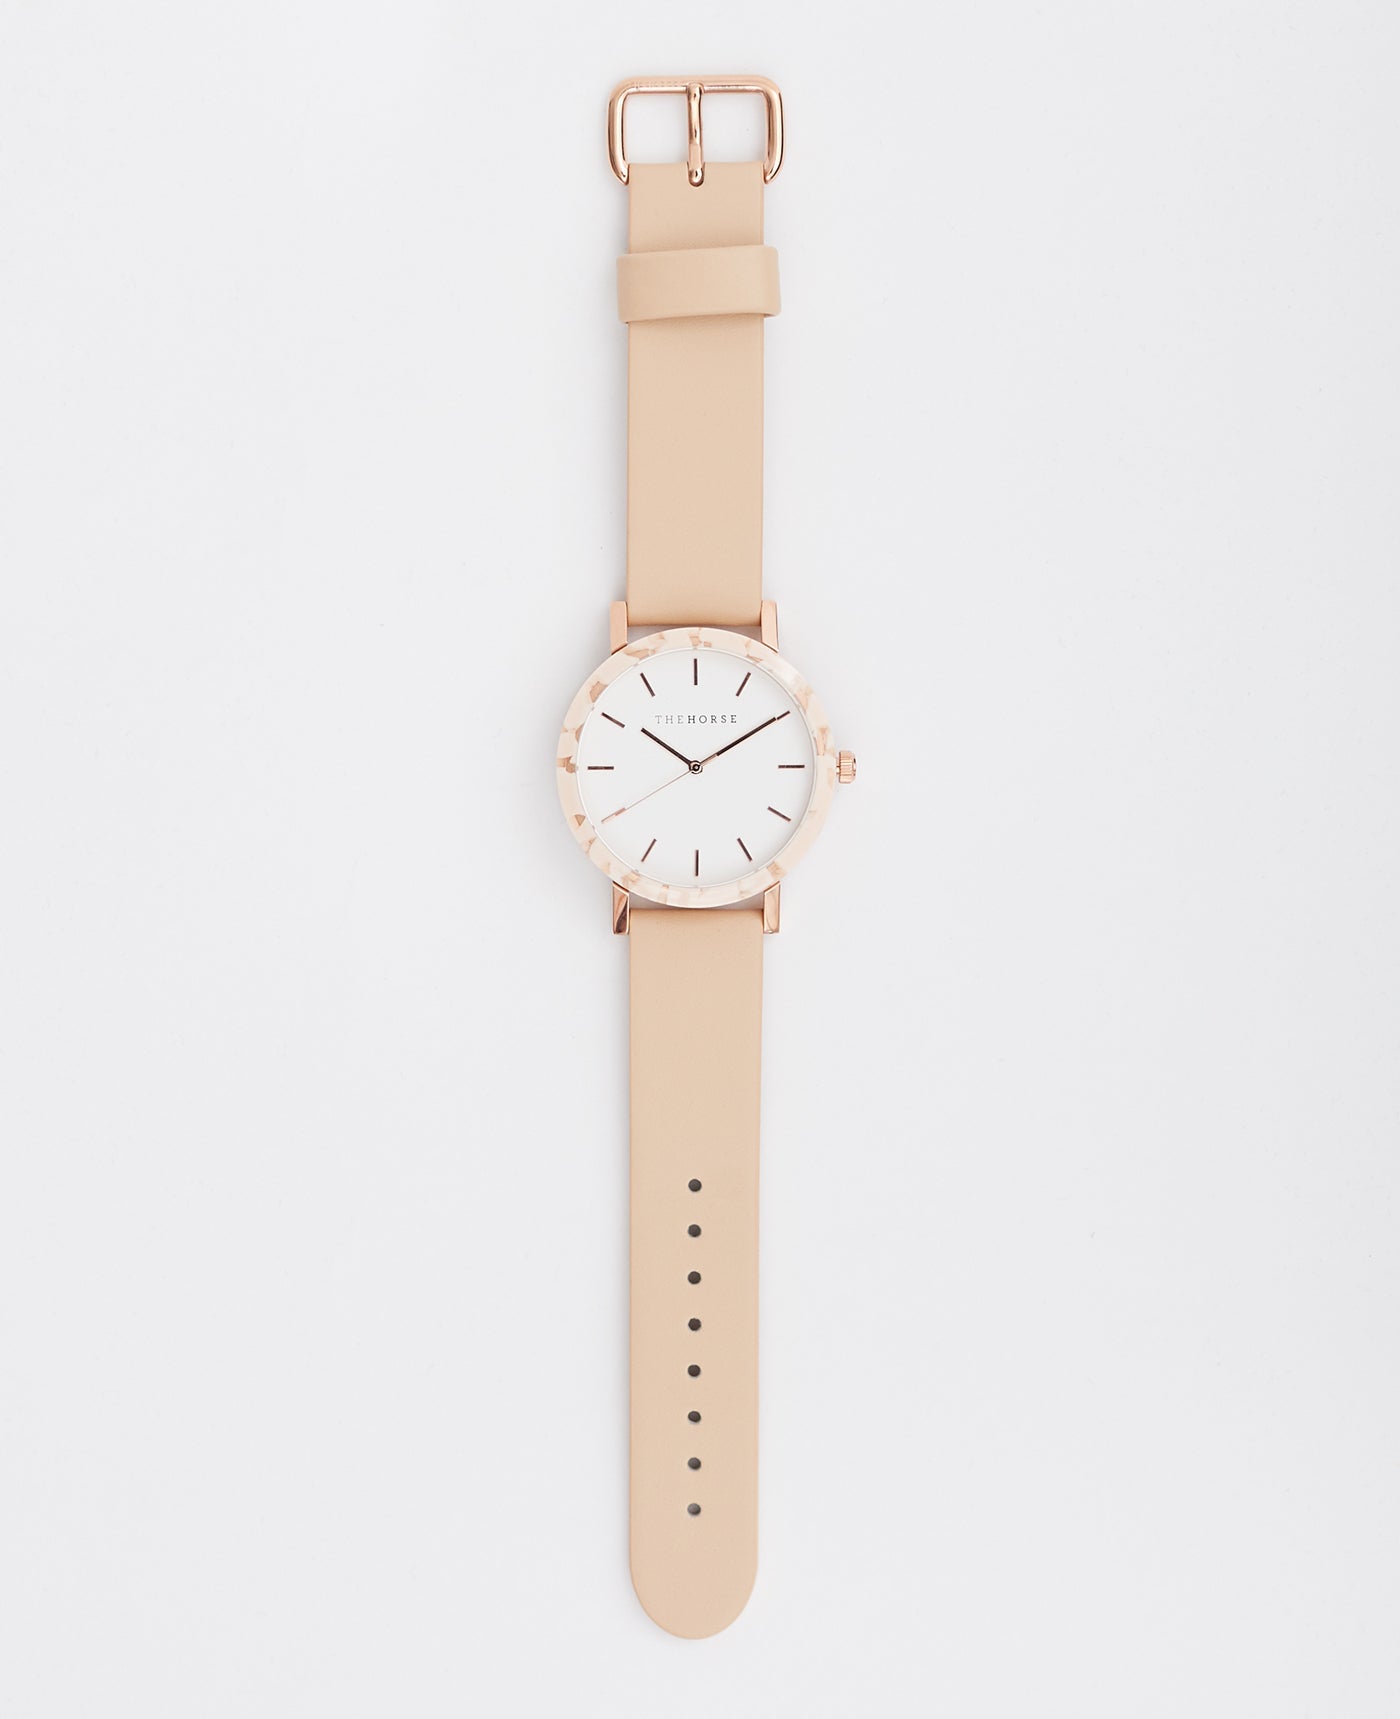 The Resin Women's Watch in Peach Speckle Case / White Dial / Rose Gold Indexing / Vegetable Tan Leather Strap by The Horse